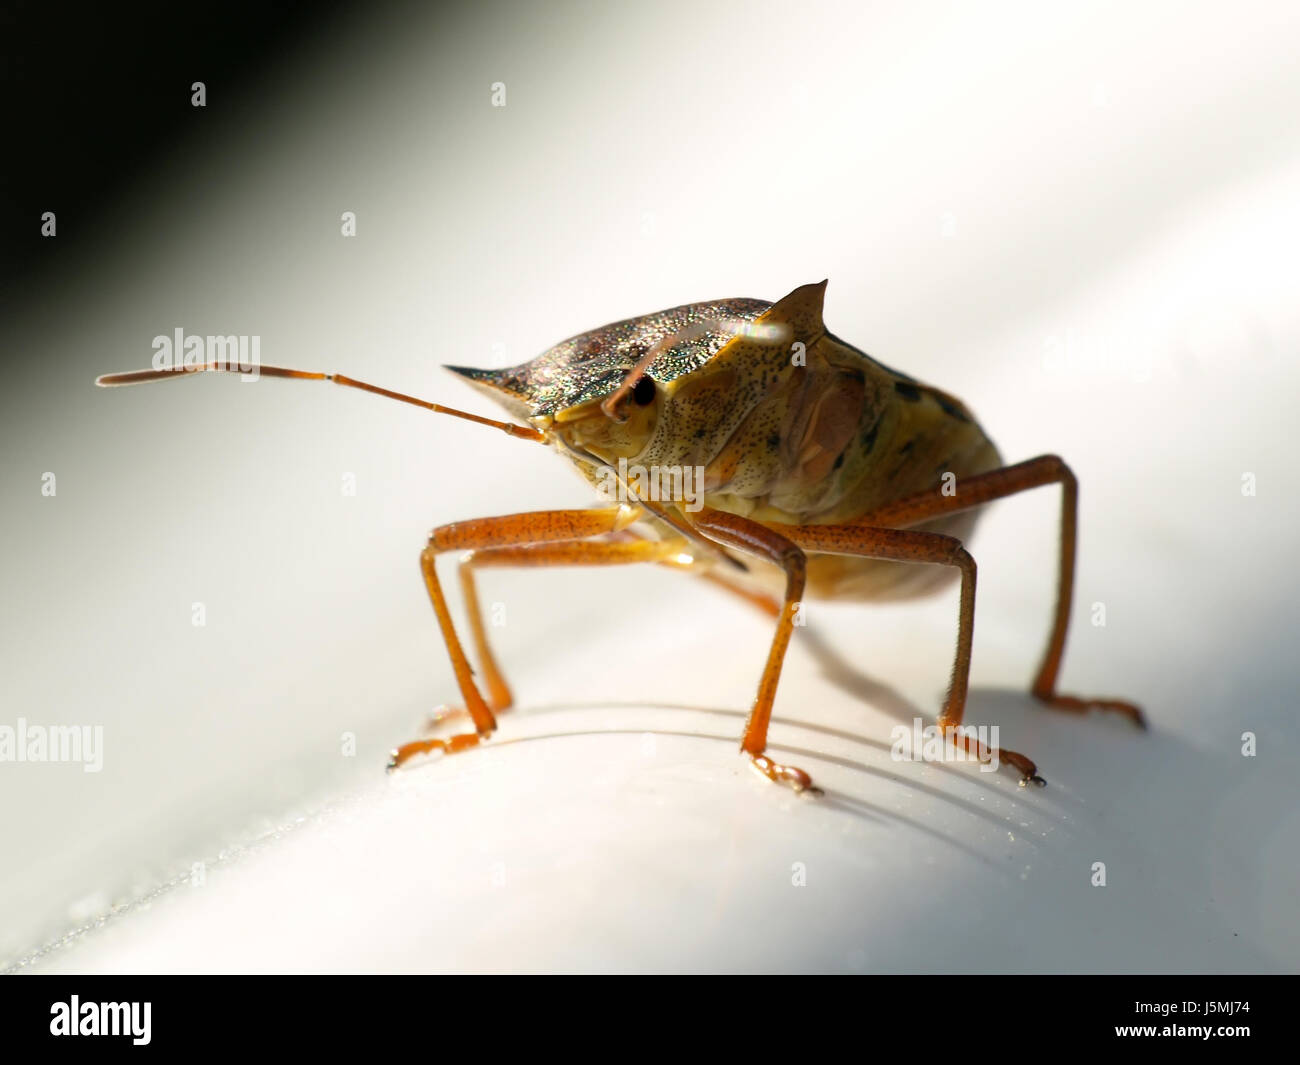 little bug quite large ... Stock Photo